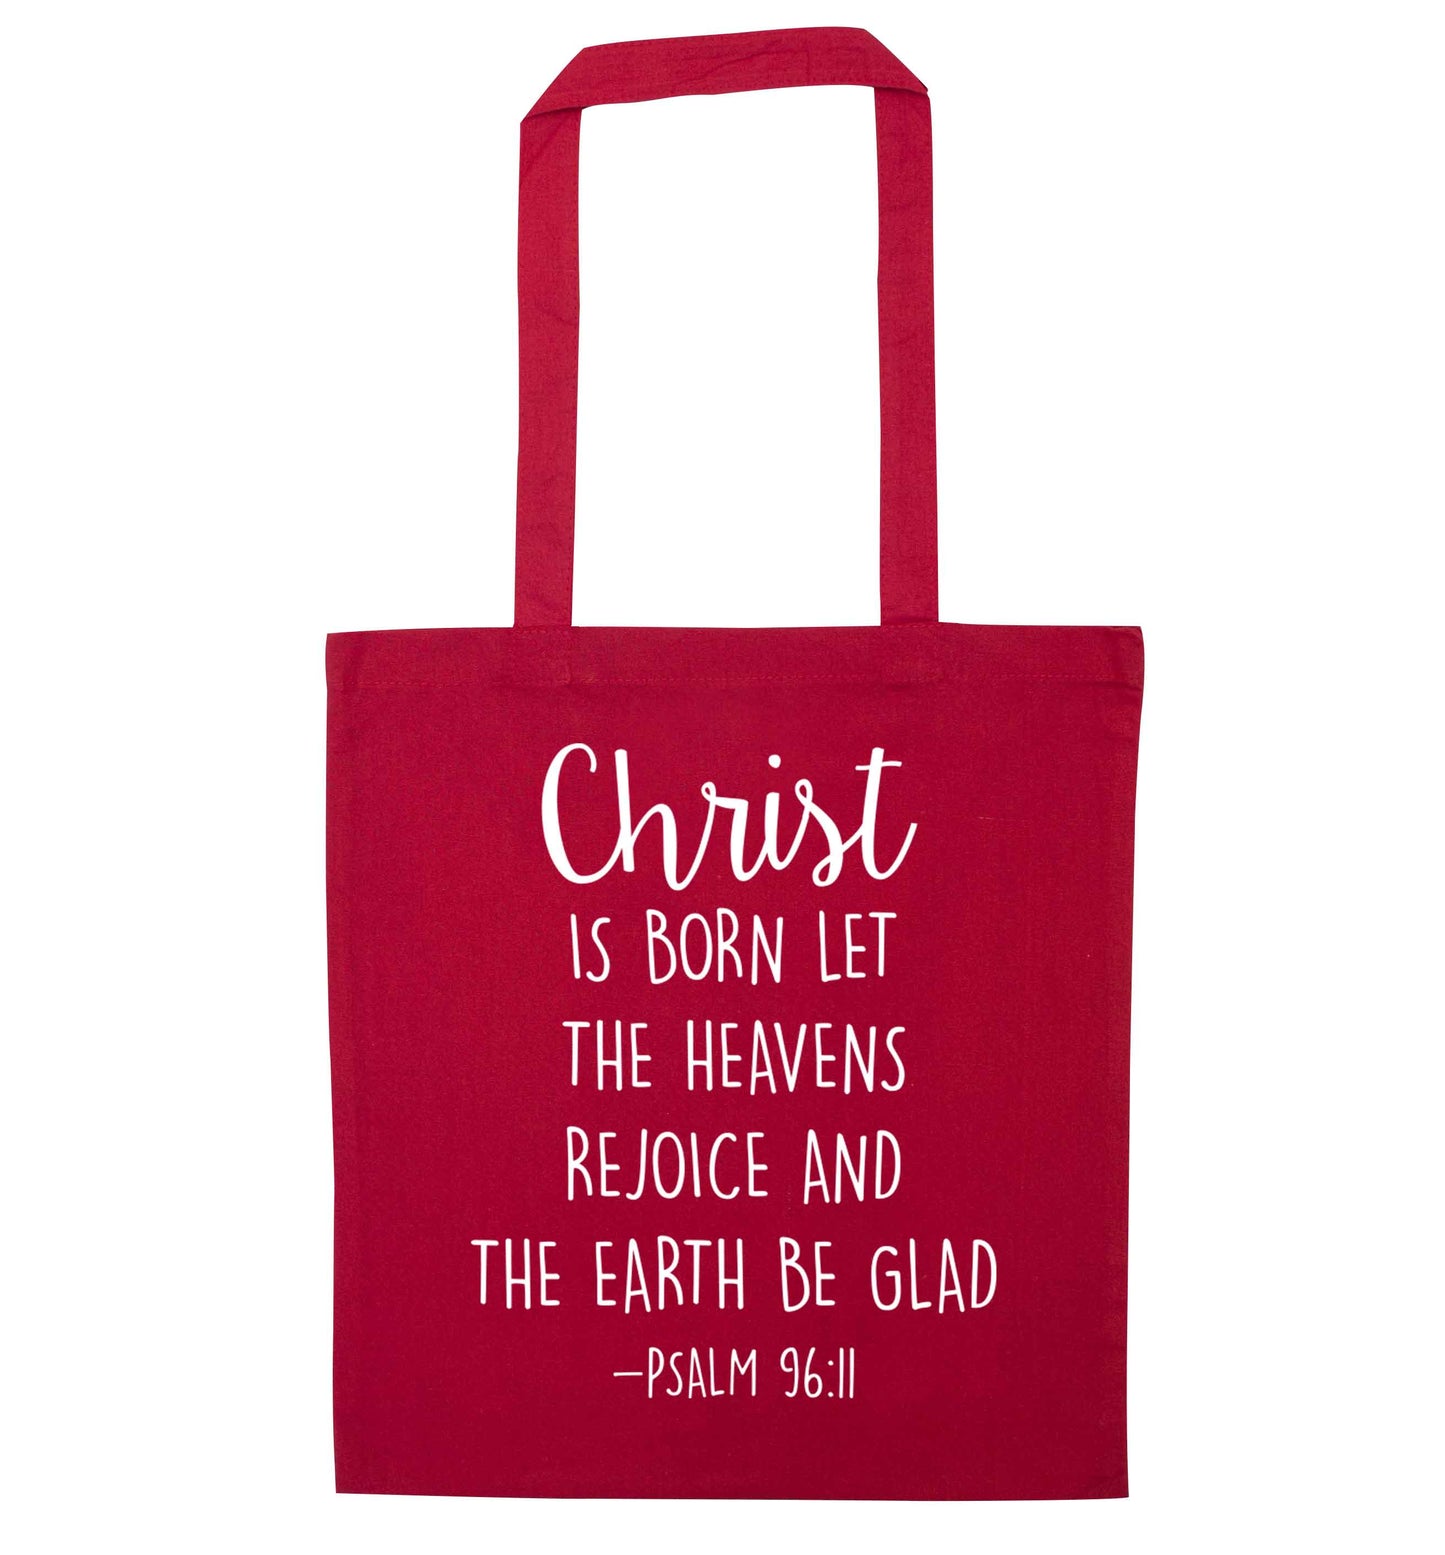 Christ is Born Psalm 96:11 red tote bag